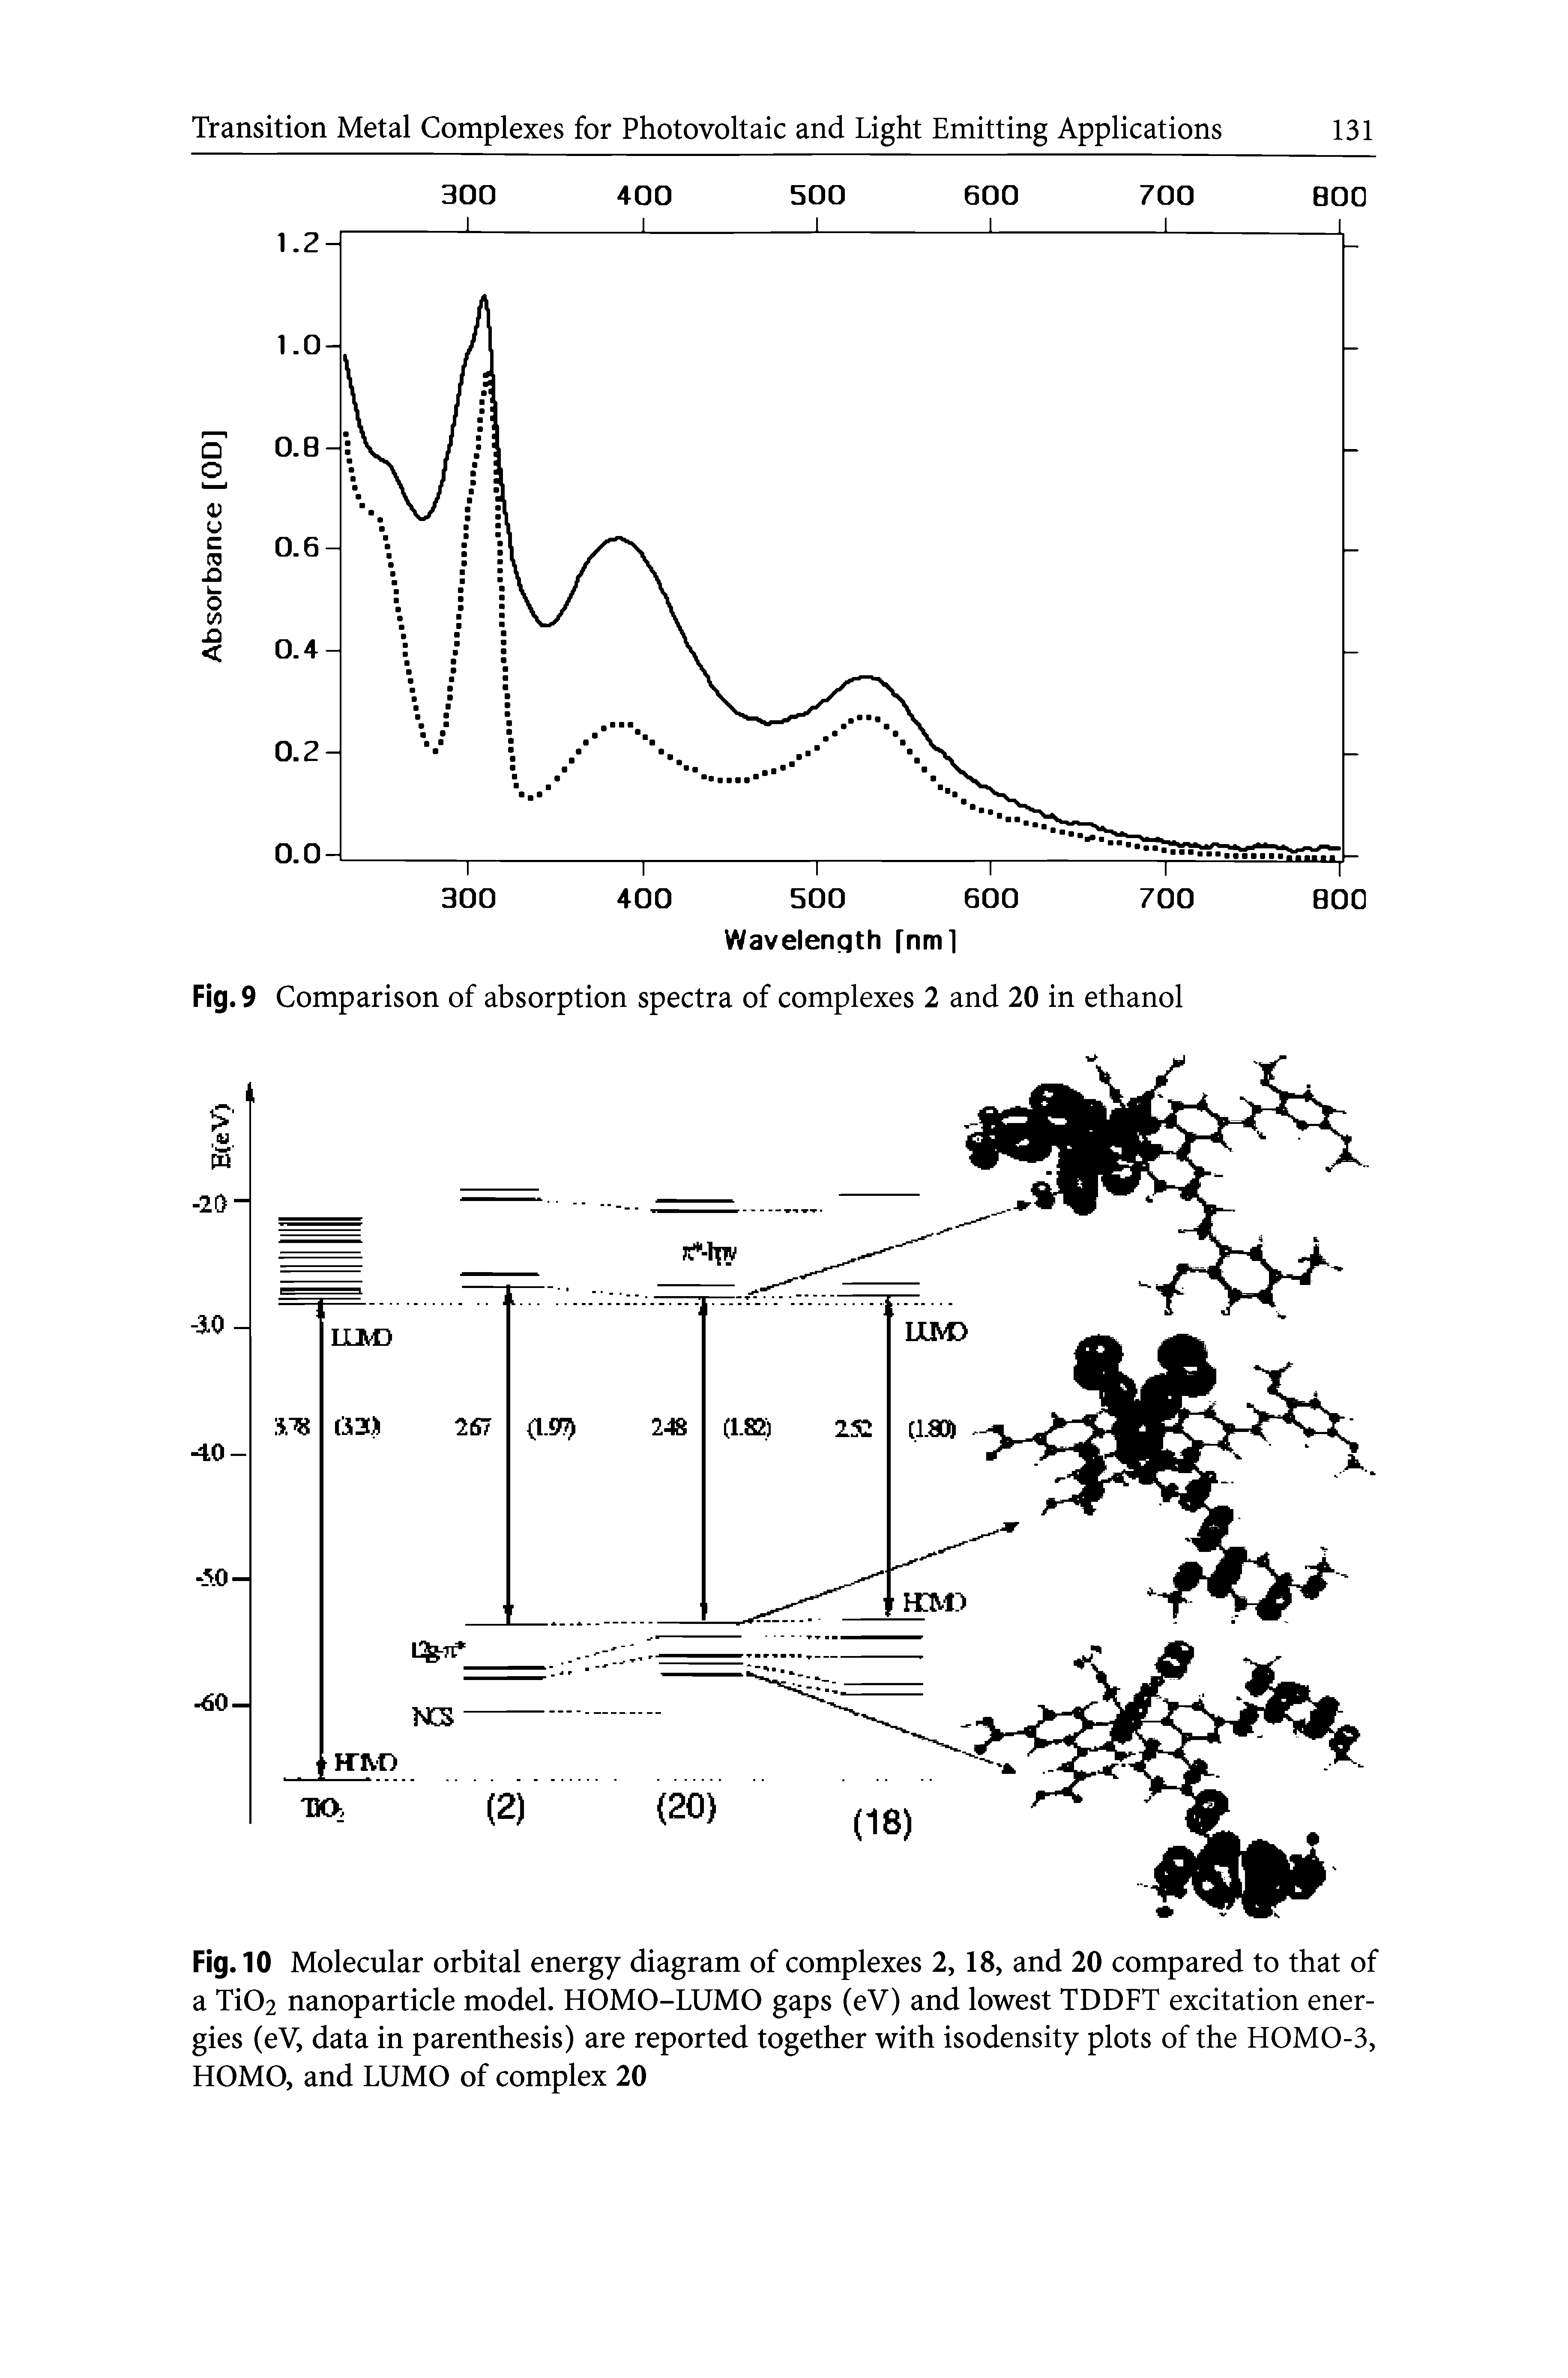 Fig. 10 Molecular orbital energy diagram of complexes 2, 18, and 20 compared to that of a Ti02 nanoparticle model. HOMO-LUMO gaps (eV) and lowest TDDFT excitation energies (eV, data in parenthesis) are reported together with isodensity plots of the HOMO-3, HOMO, and LUMO of complex 20...